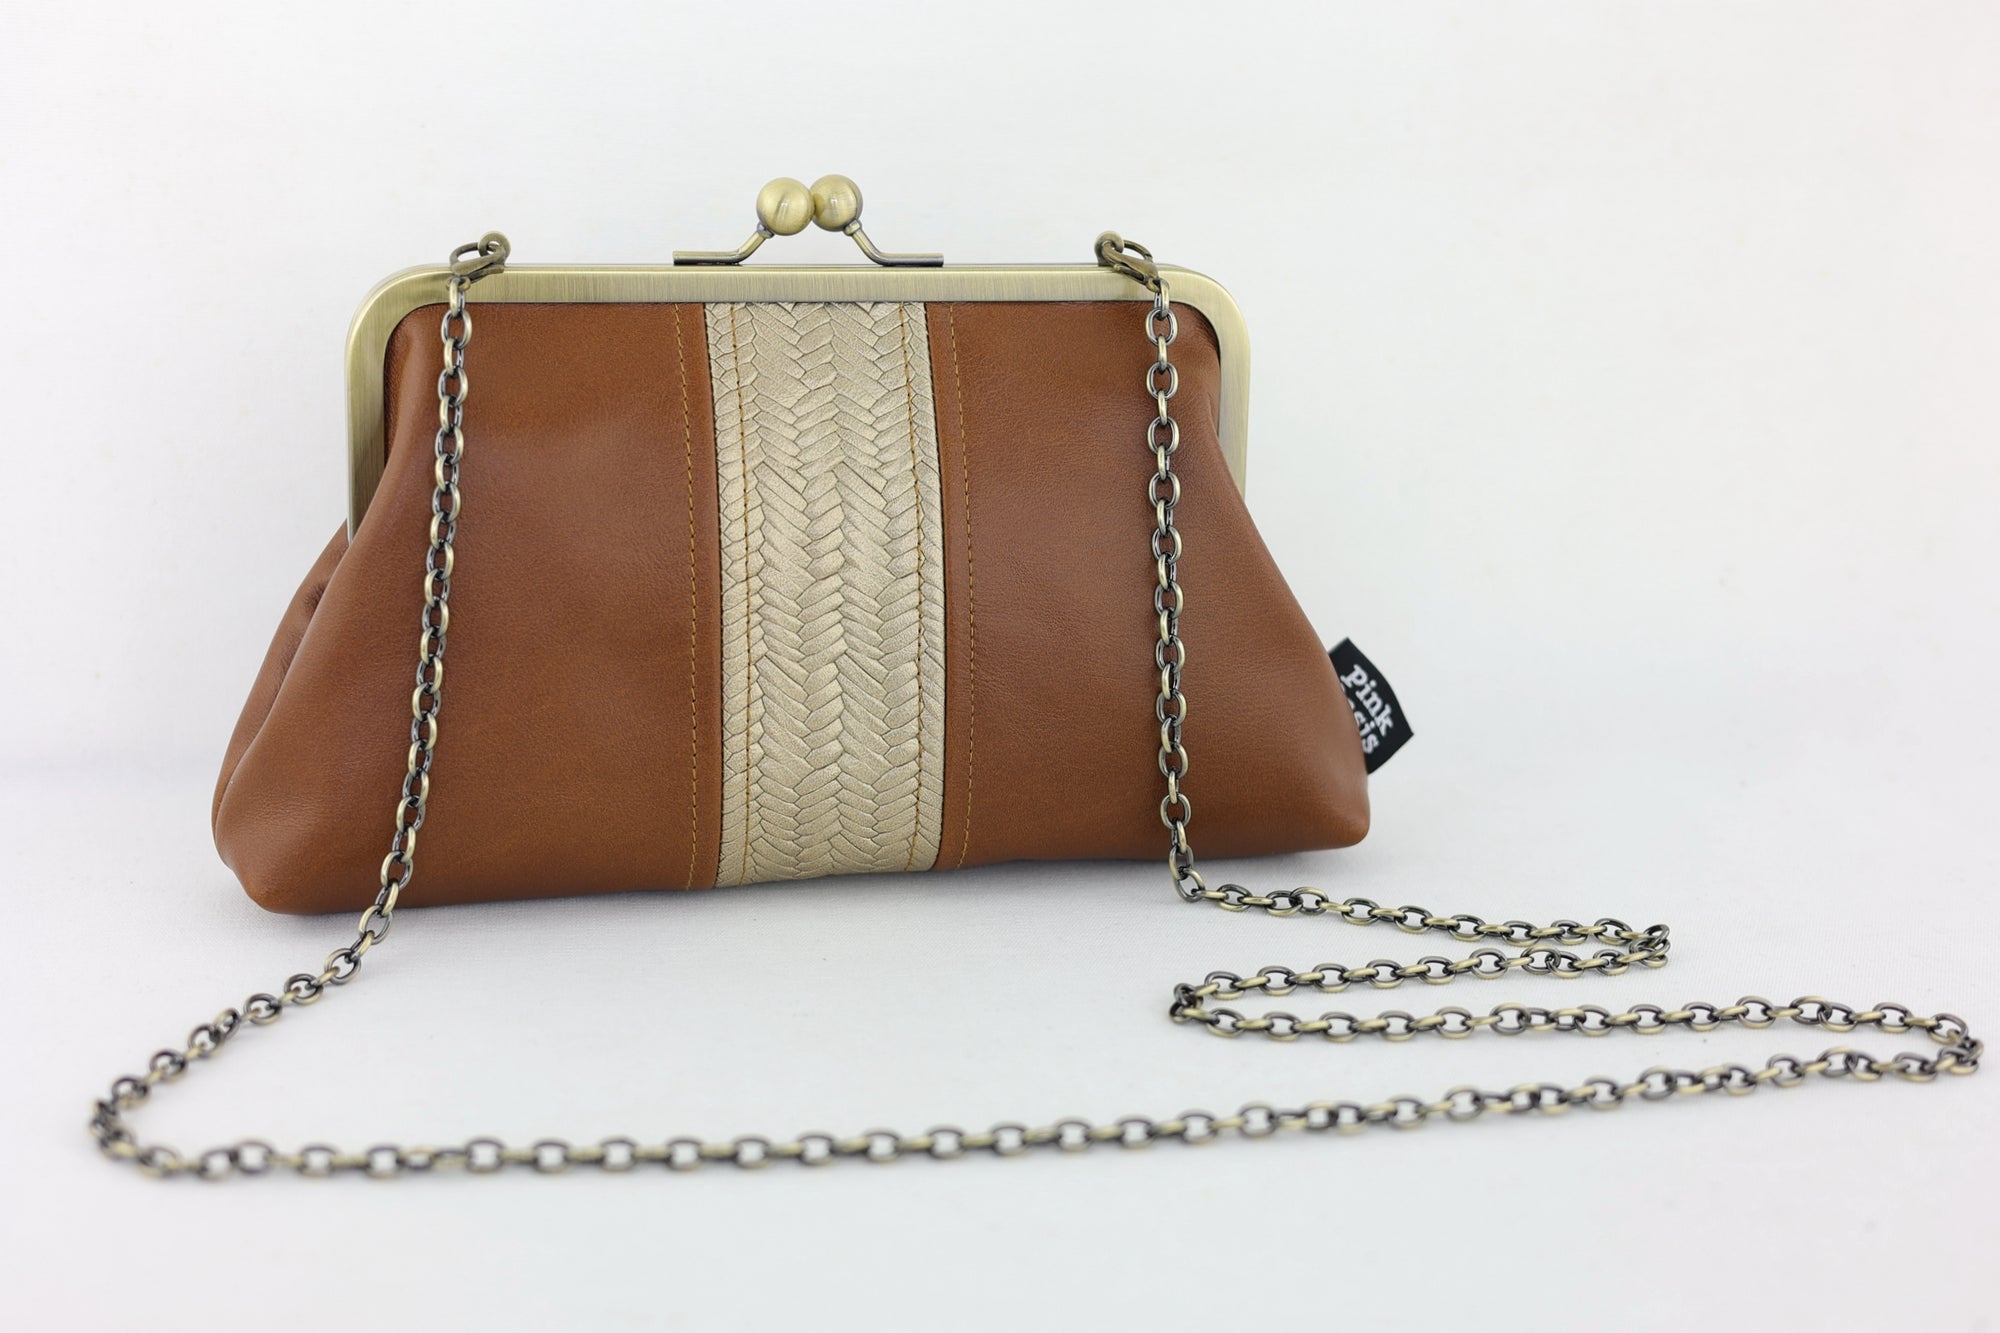 Distressed Tan Leather Kisslock Clutch with Chain Strap | PINK OASIS